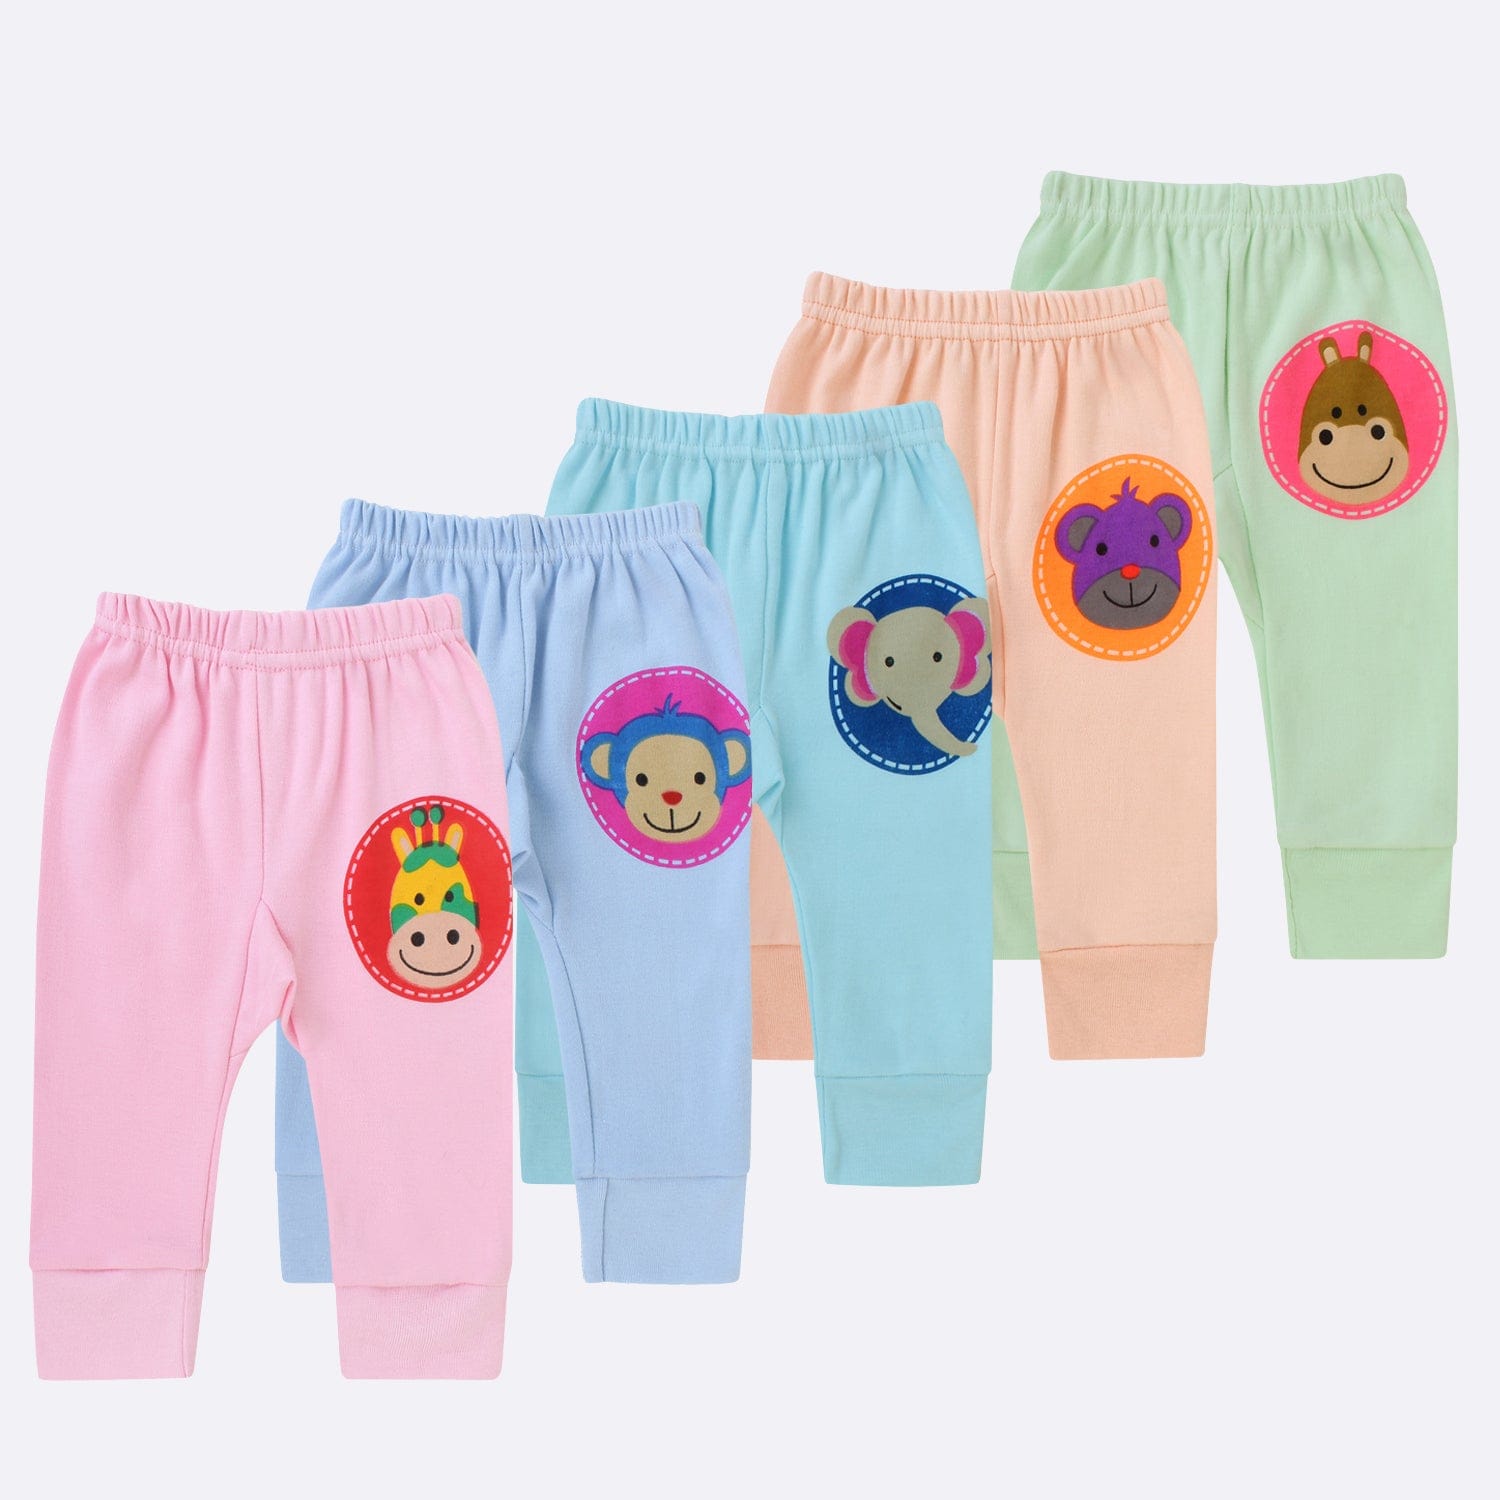 Unisex Kids Pack of 5 Printed Cotton Lounge Pants (Multicolor)